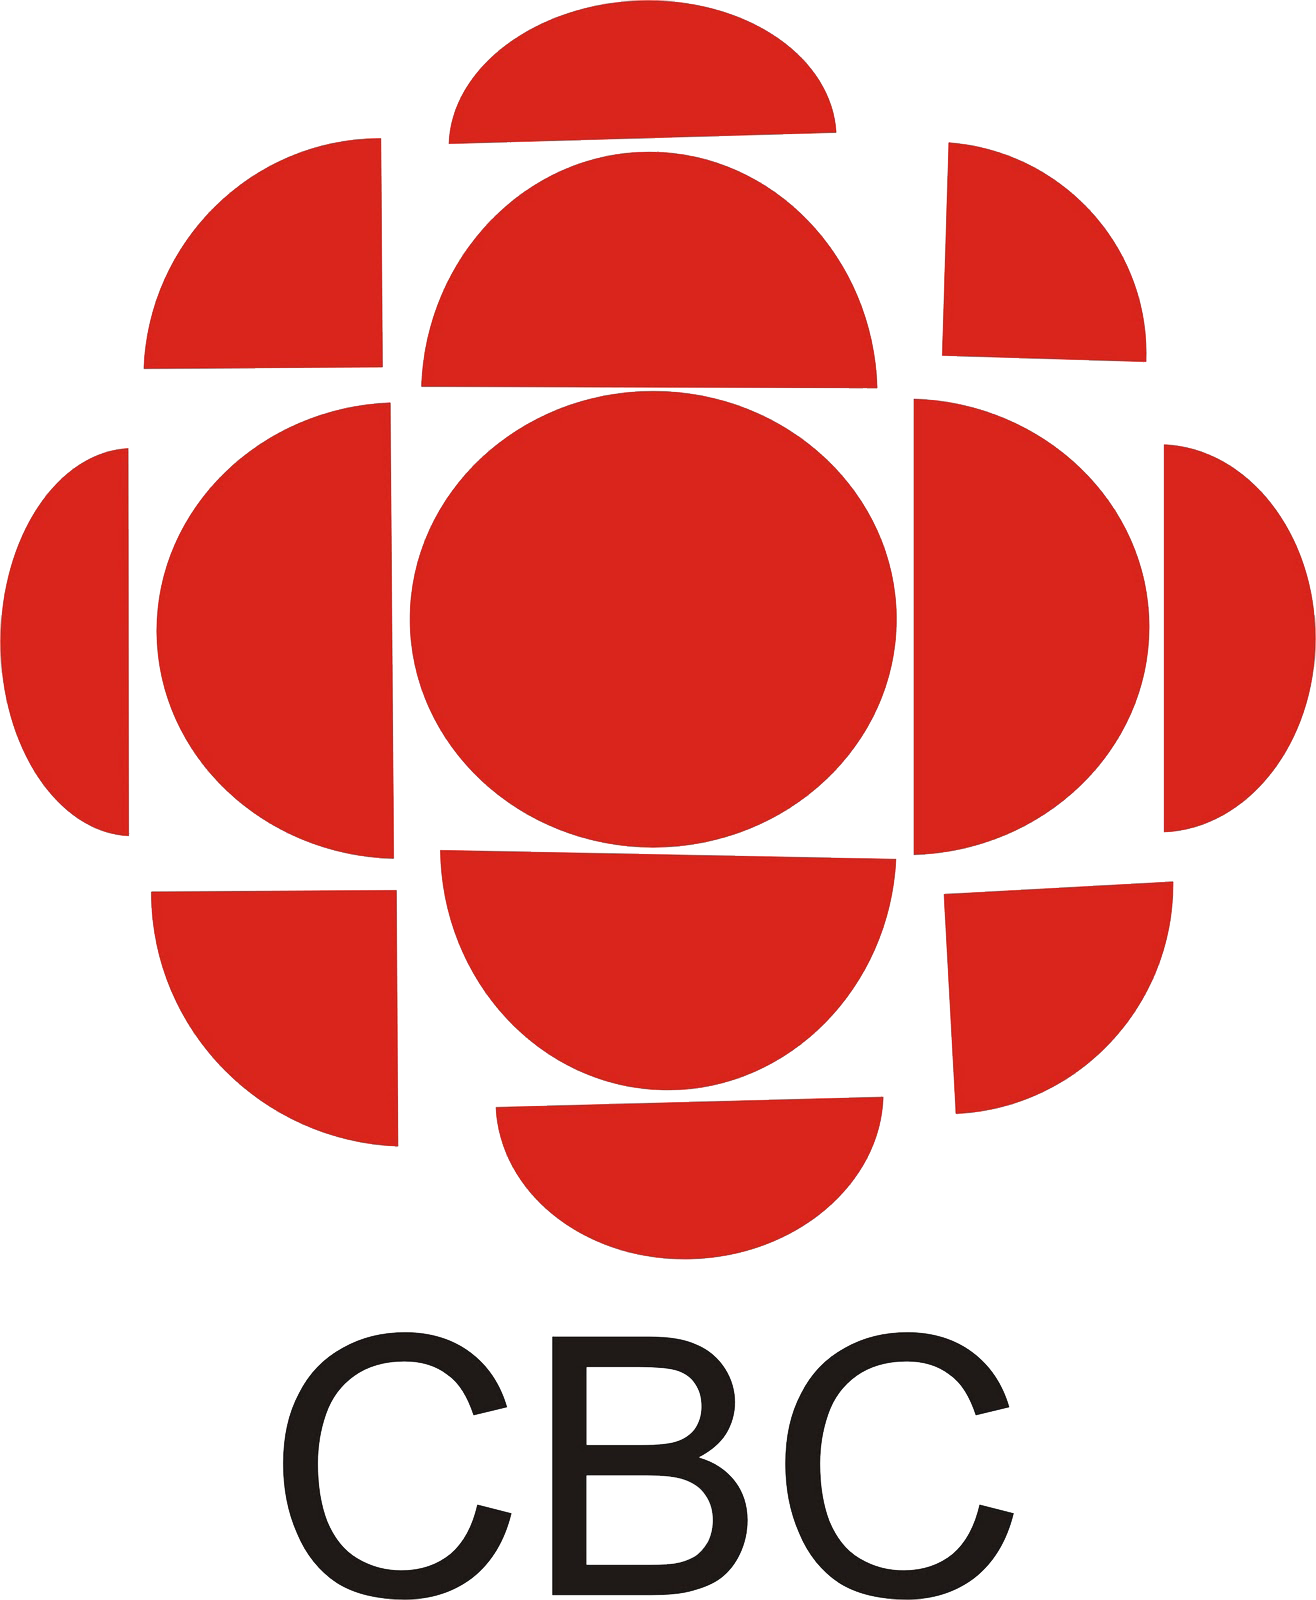 CBC.png